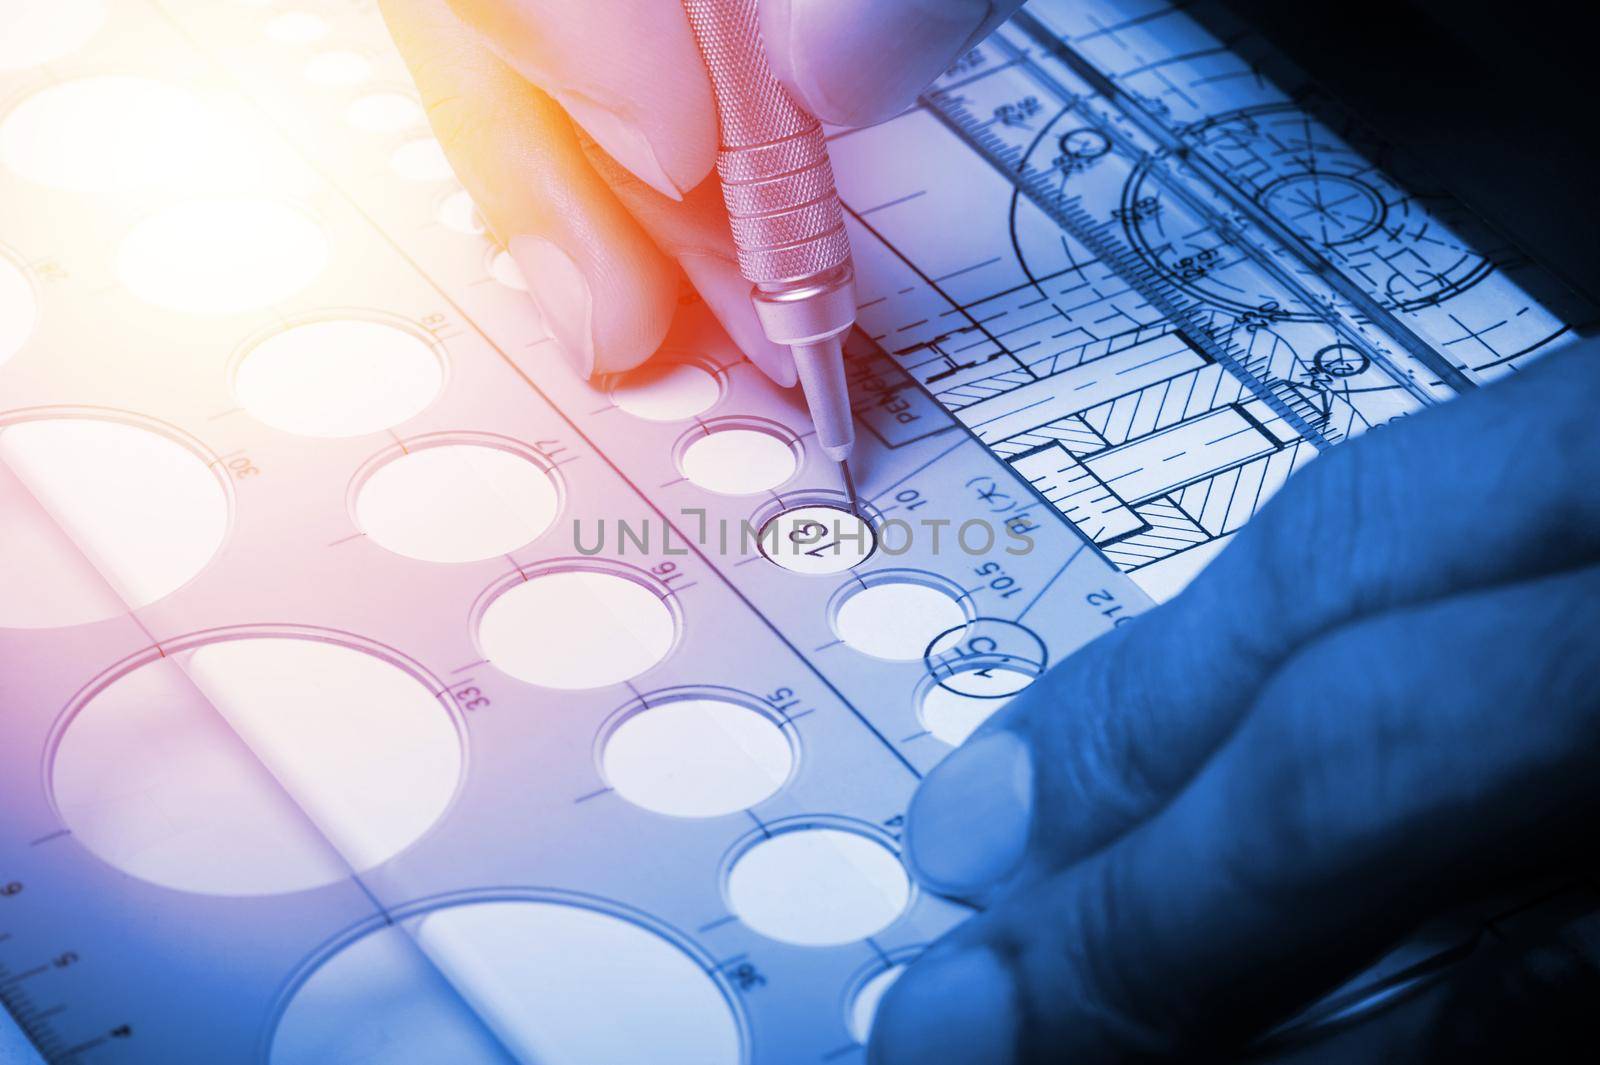 closeup technician's hand while using the industrial drawing tools, industrail drawing concept.